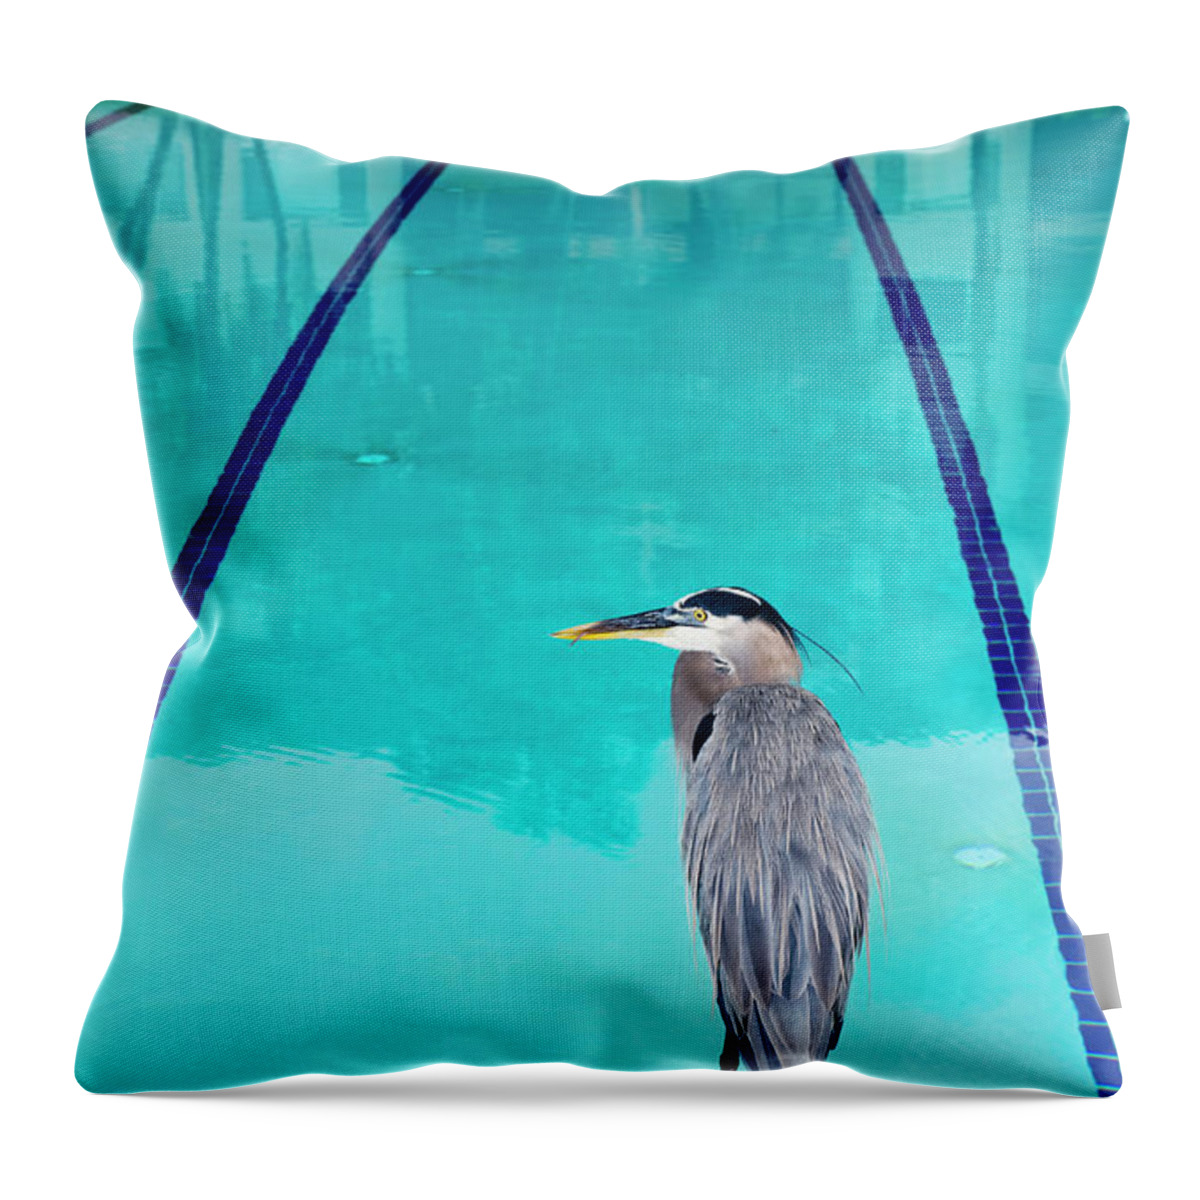 Swimming Pool Throw Pillow featuring the photograph Heron At Pool by Thomas Winz